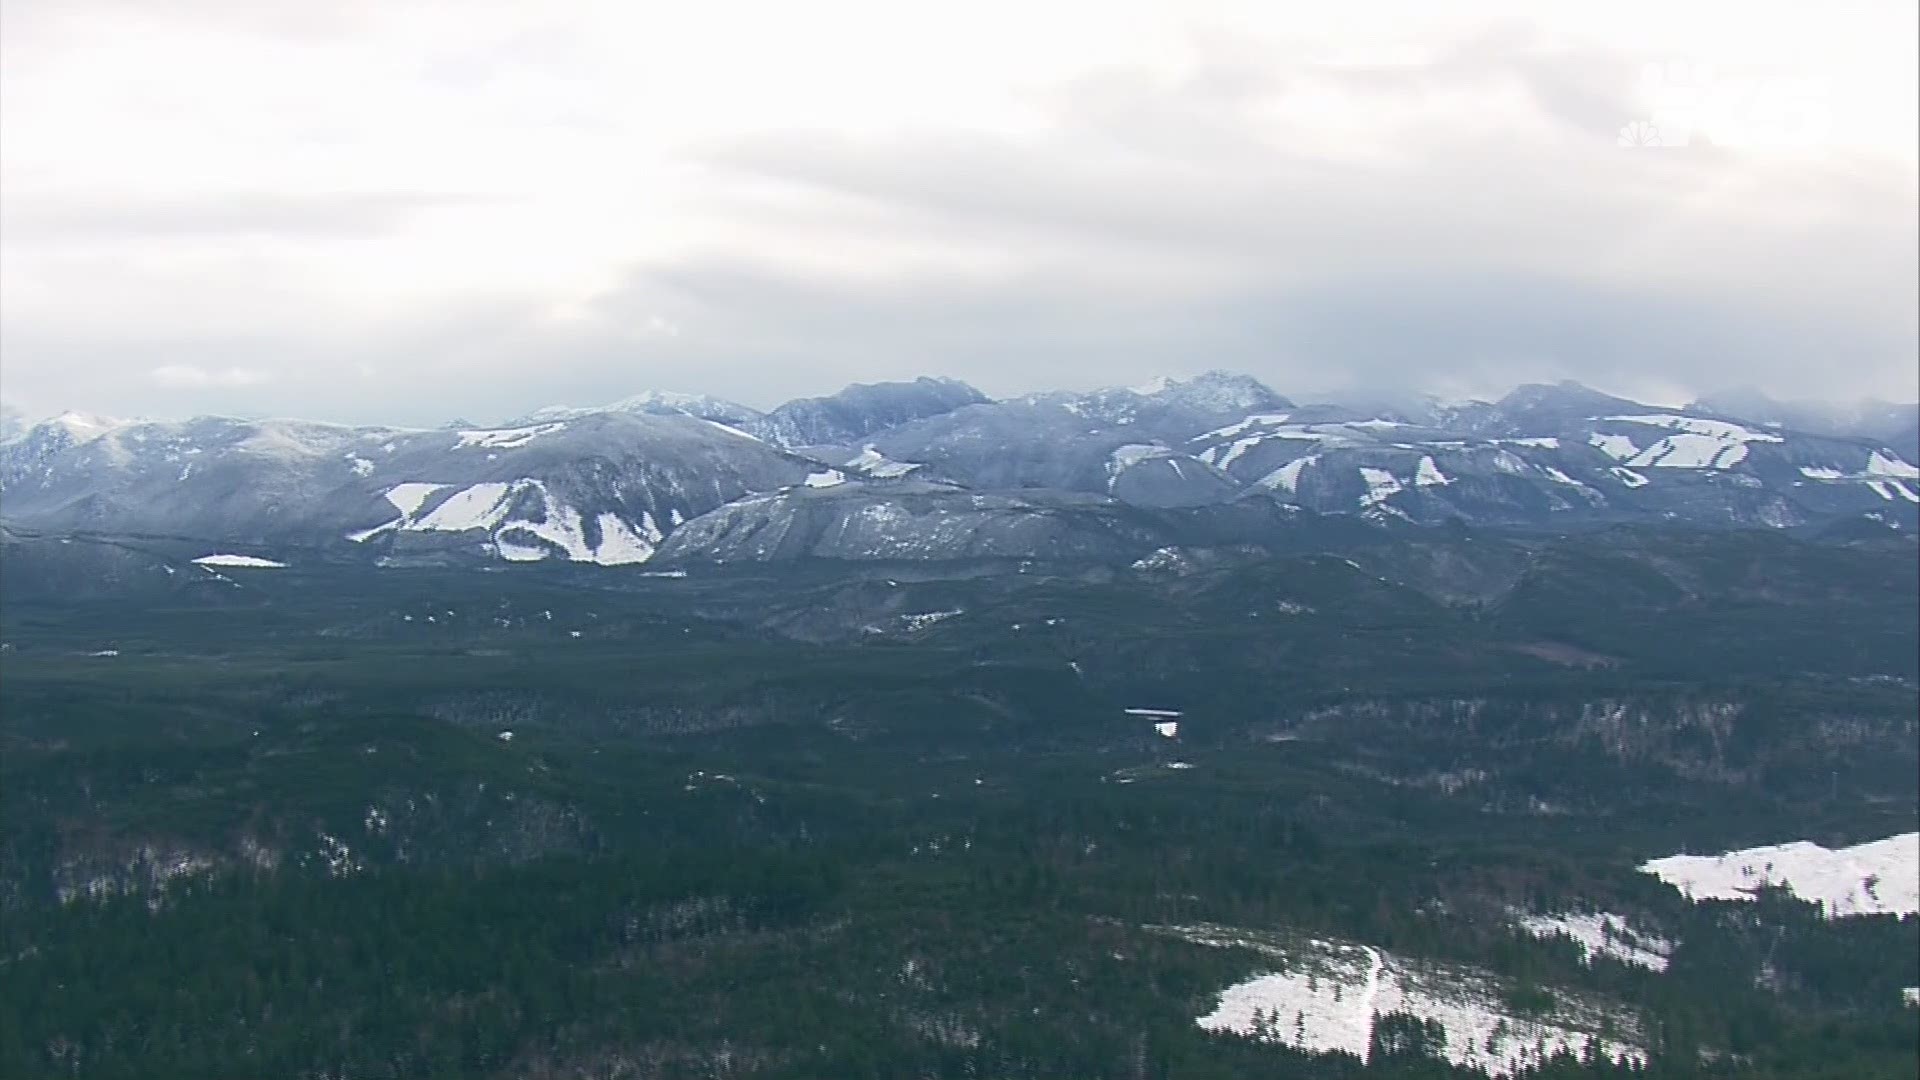 Washington's beautiful Cascade Mountains as seen from the SkyKING helicopter.